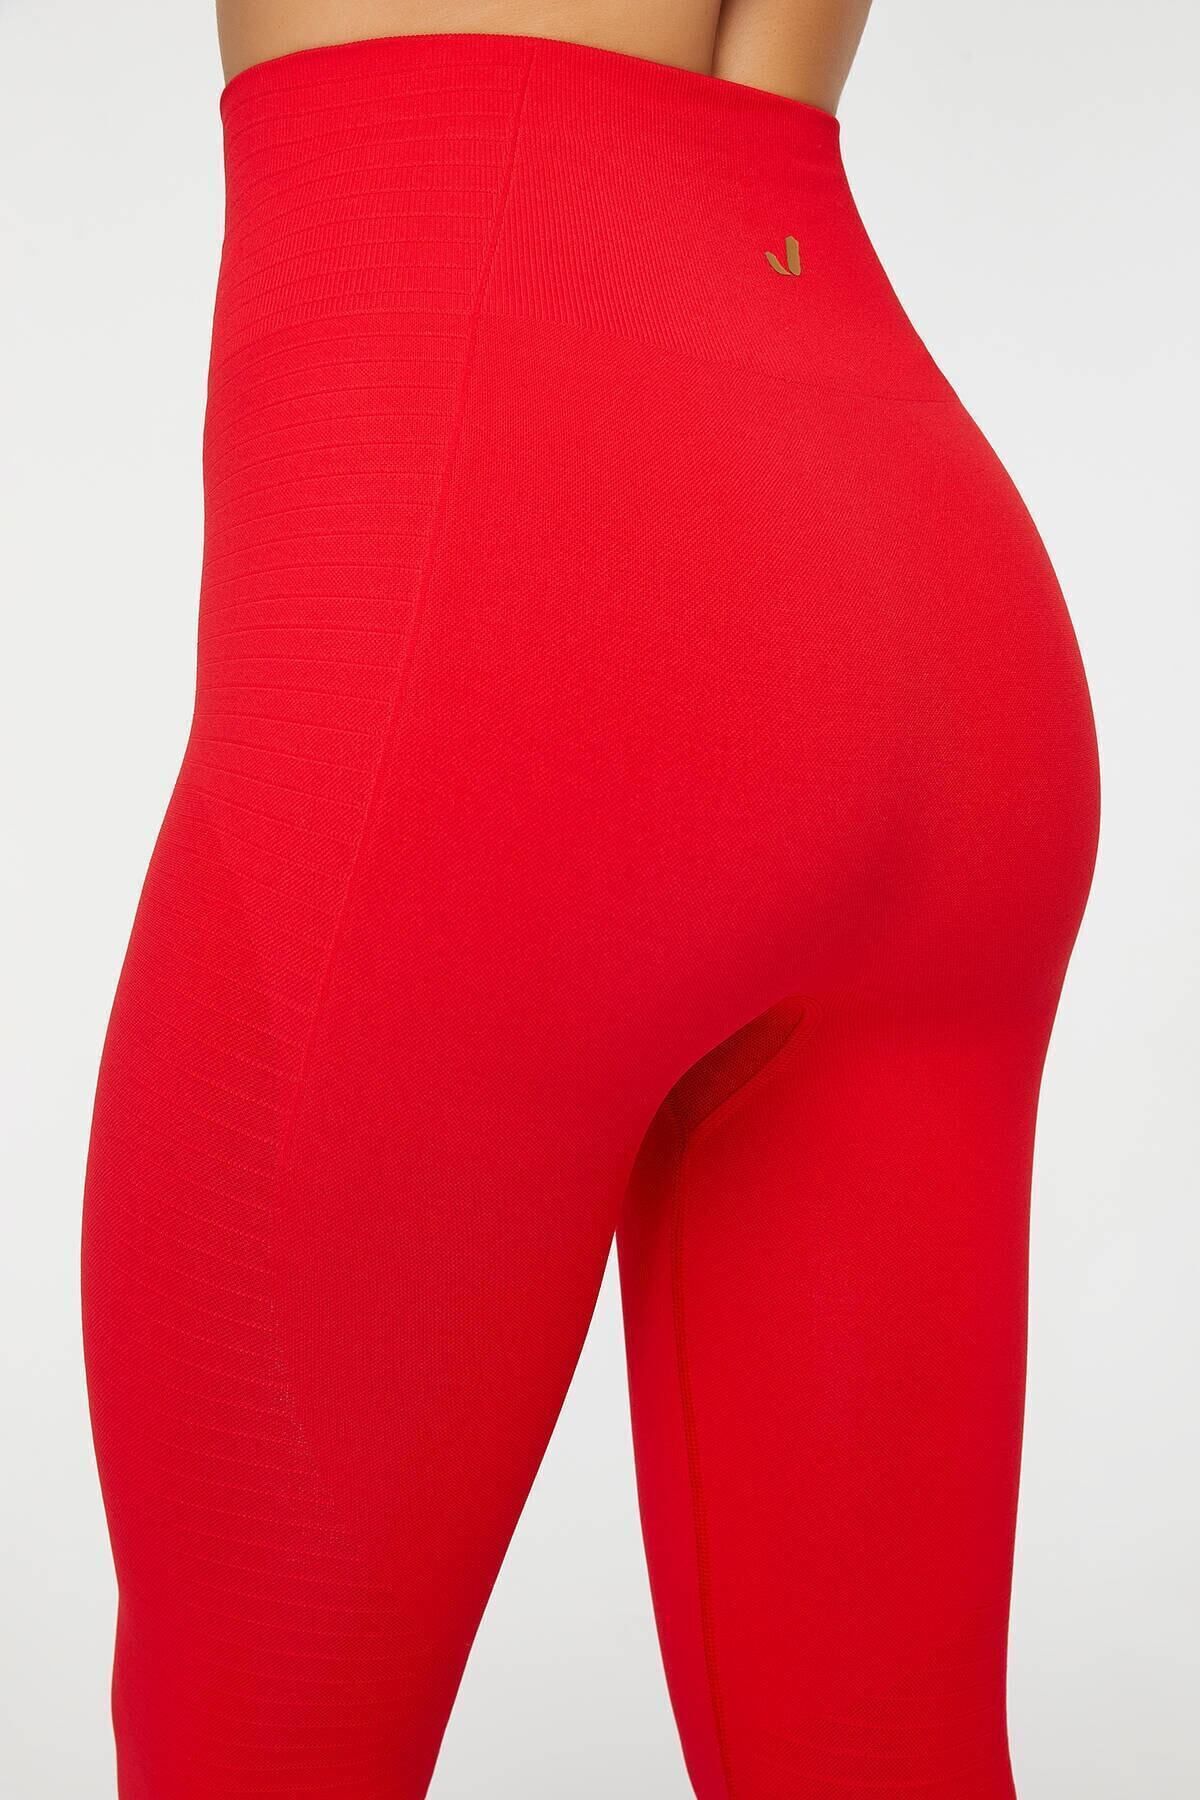 Jerf Gela High Waist, Flexible and Lifting Sports Tights Red